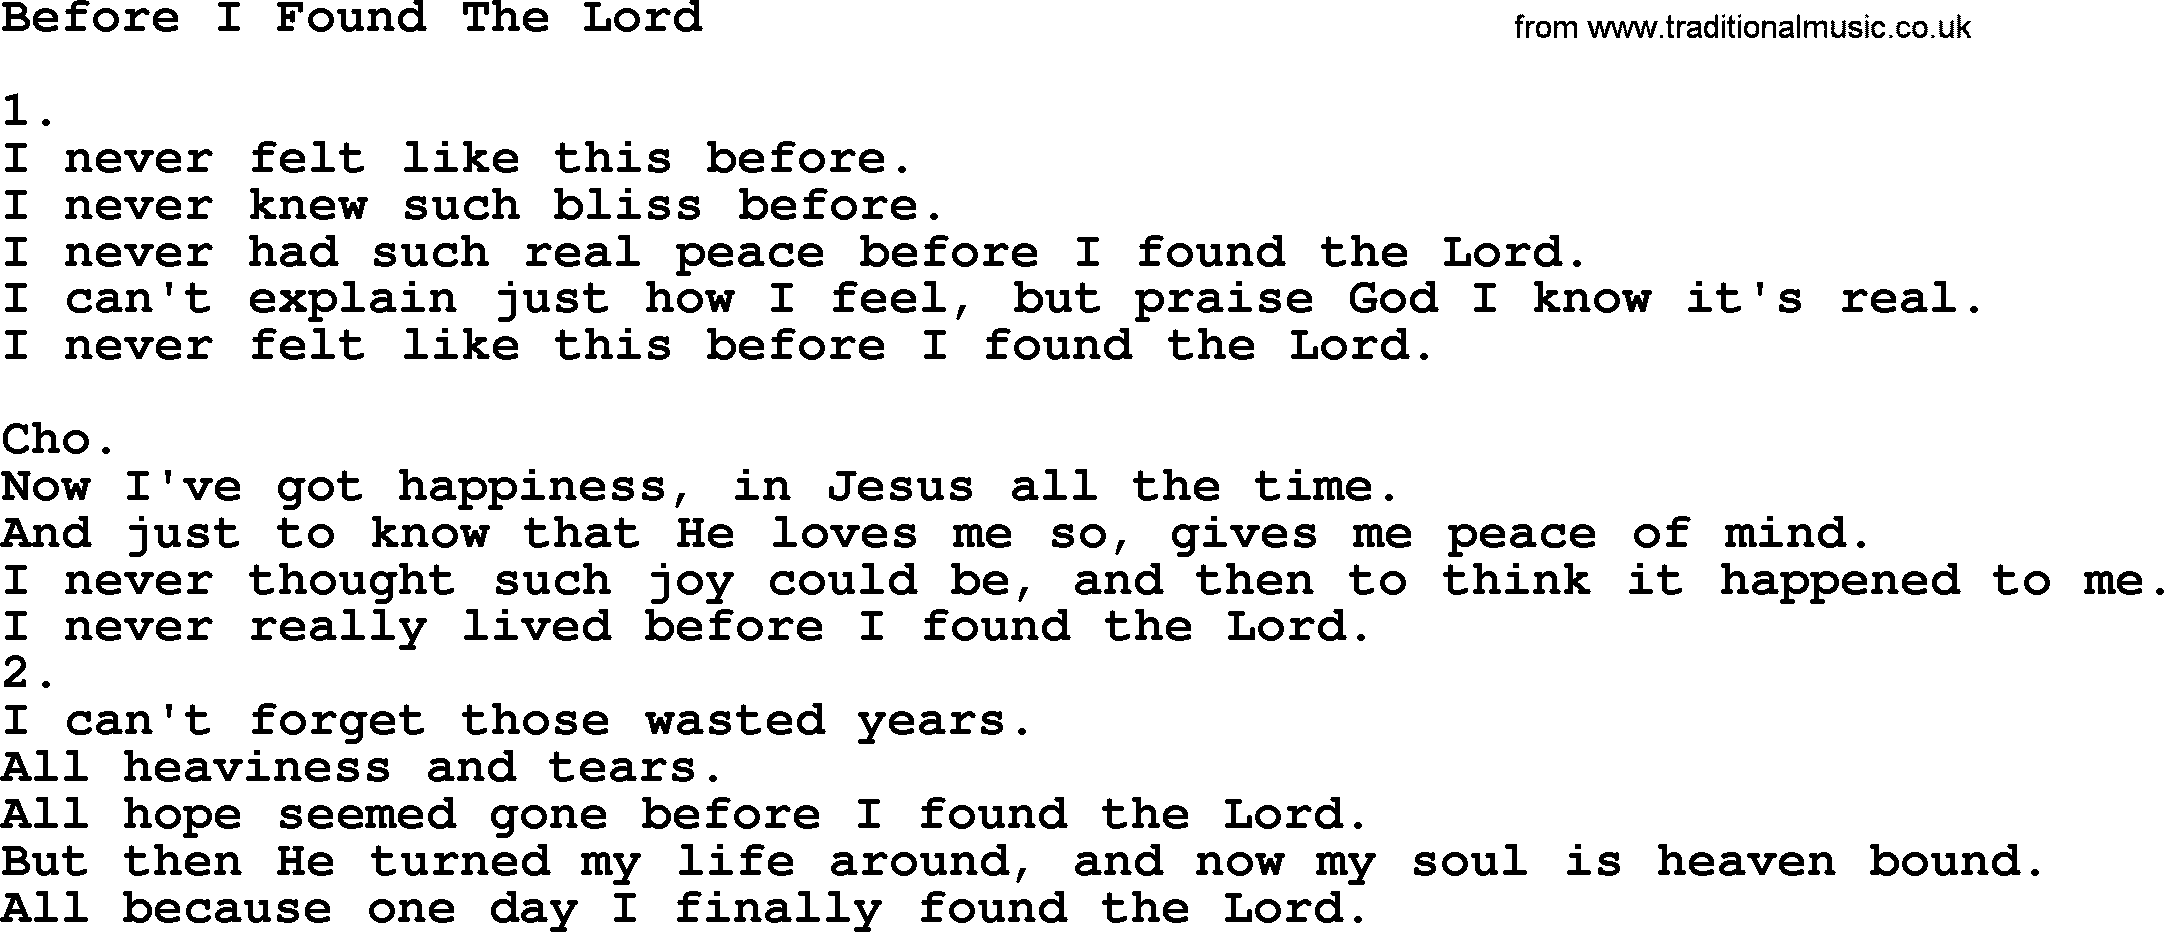 Apostolic & Pentecostal Hymns and Songs, Hymn: Before I Found The Lord lyrics and PDF